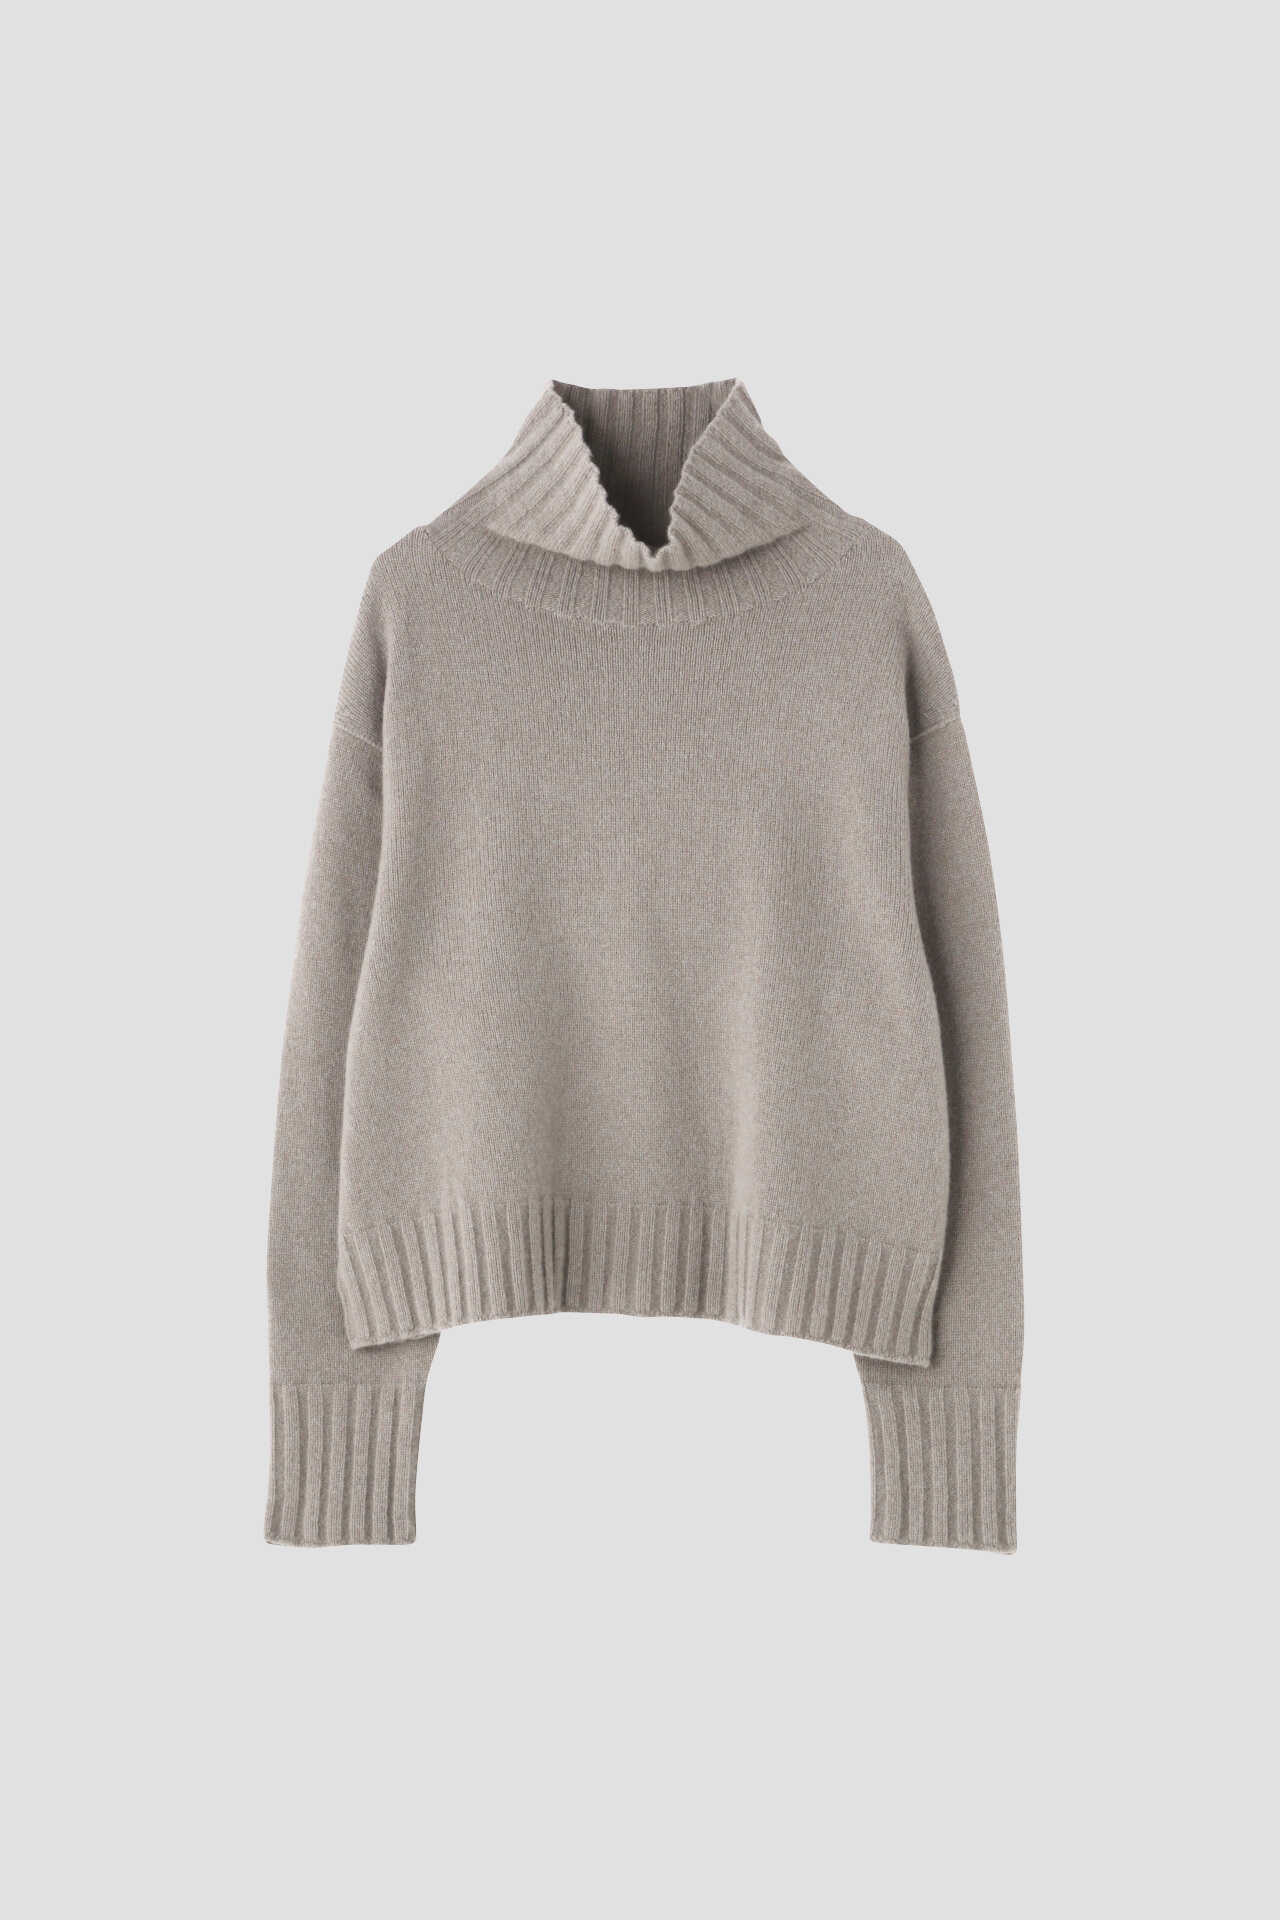 WOOL CASHMERE13